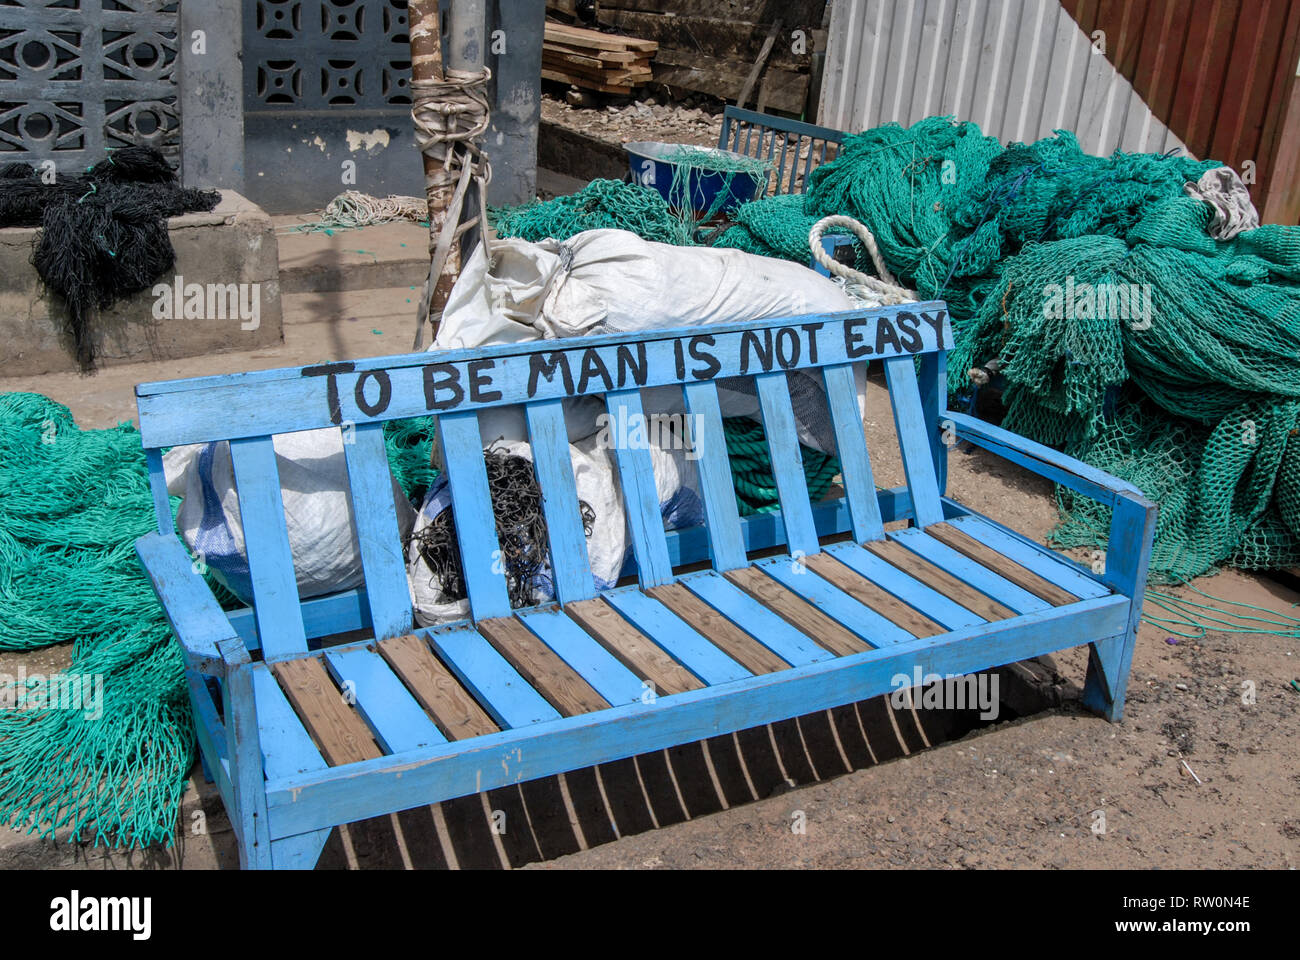 To be man is not easy - an interesting message on a blue street bench at the harbour of Elmina, Ghana, West Africa Stock Photo